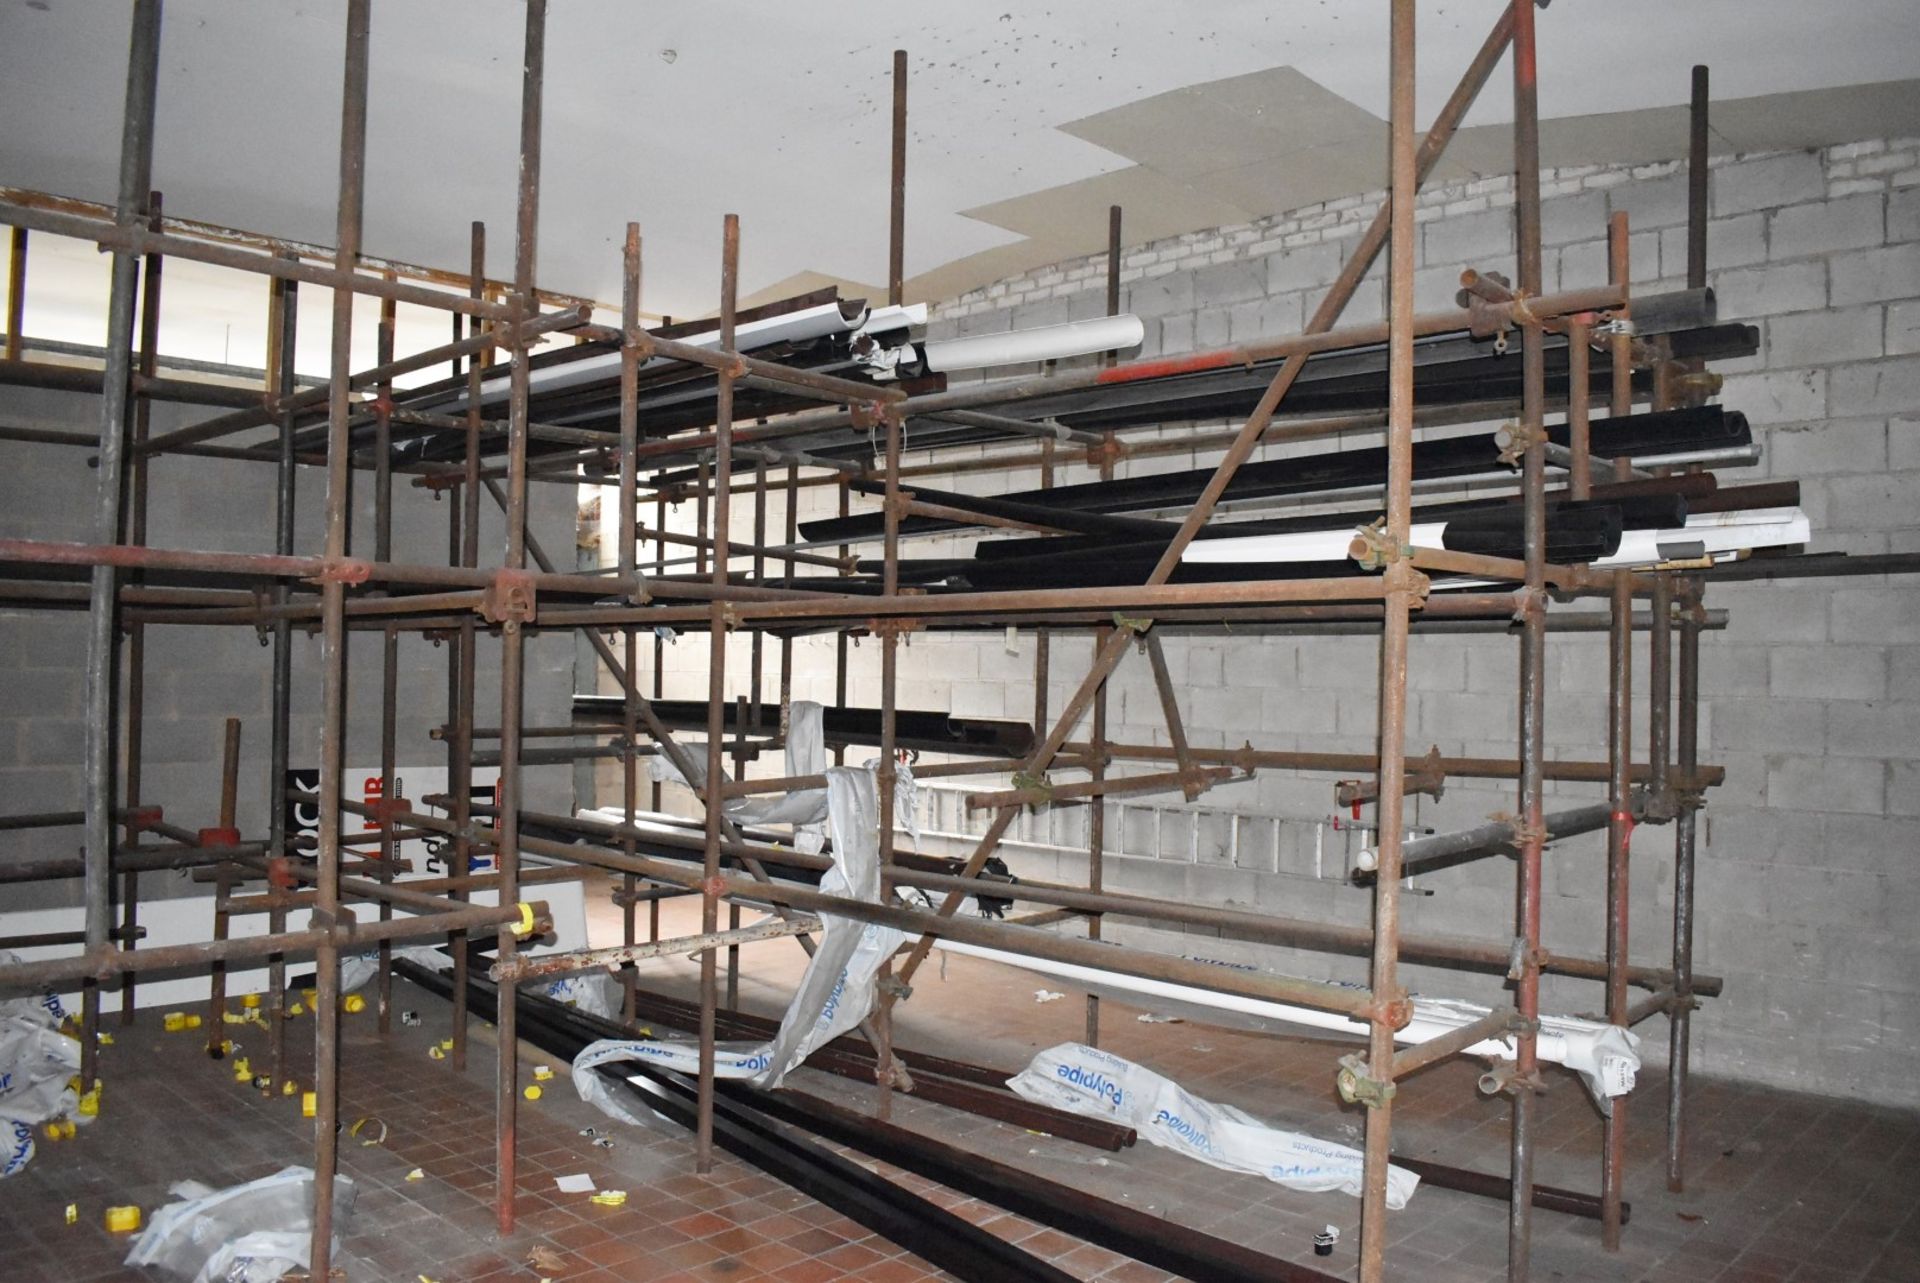 1 x Large Collection of Scaffolding and Fixtures Covering a Floor Space of Approx 13 x 13ft - Image 5 of 15